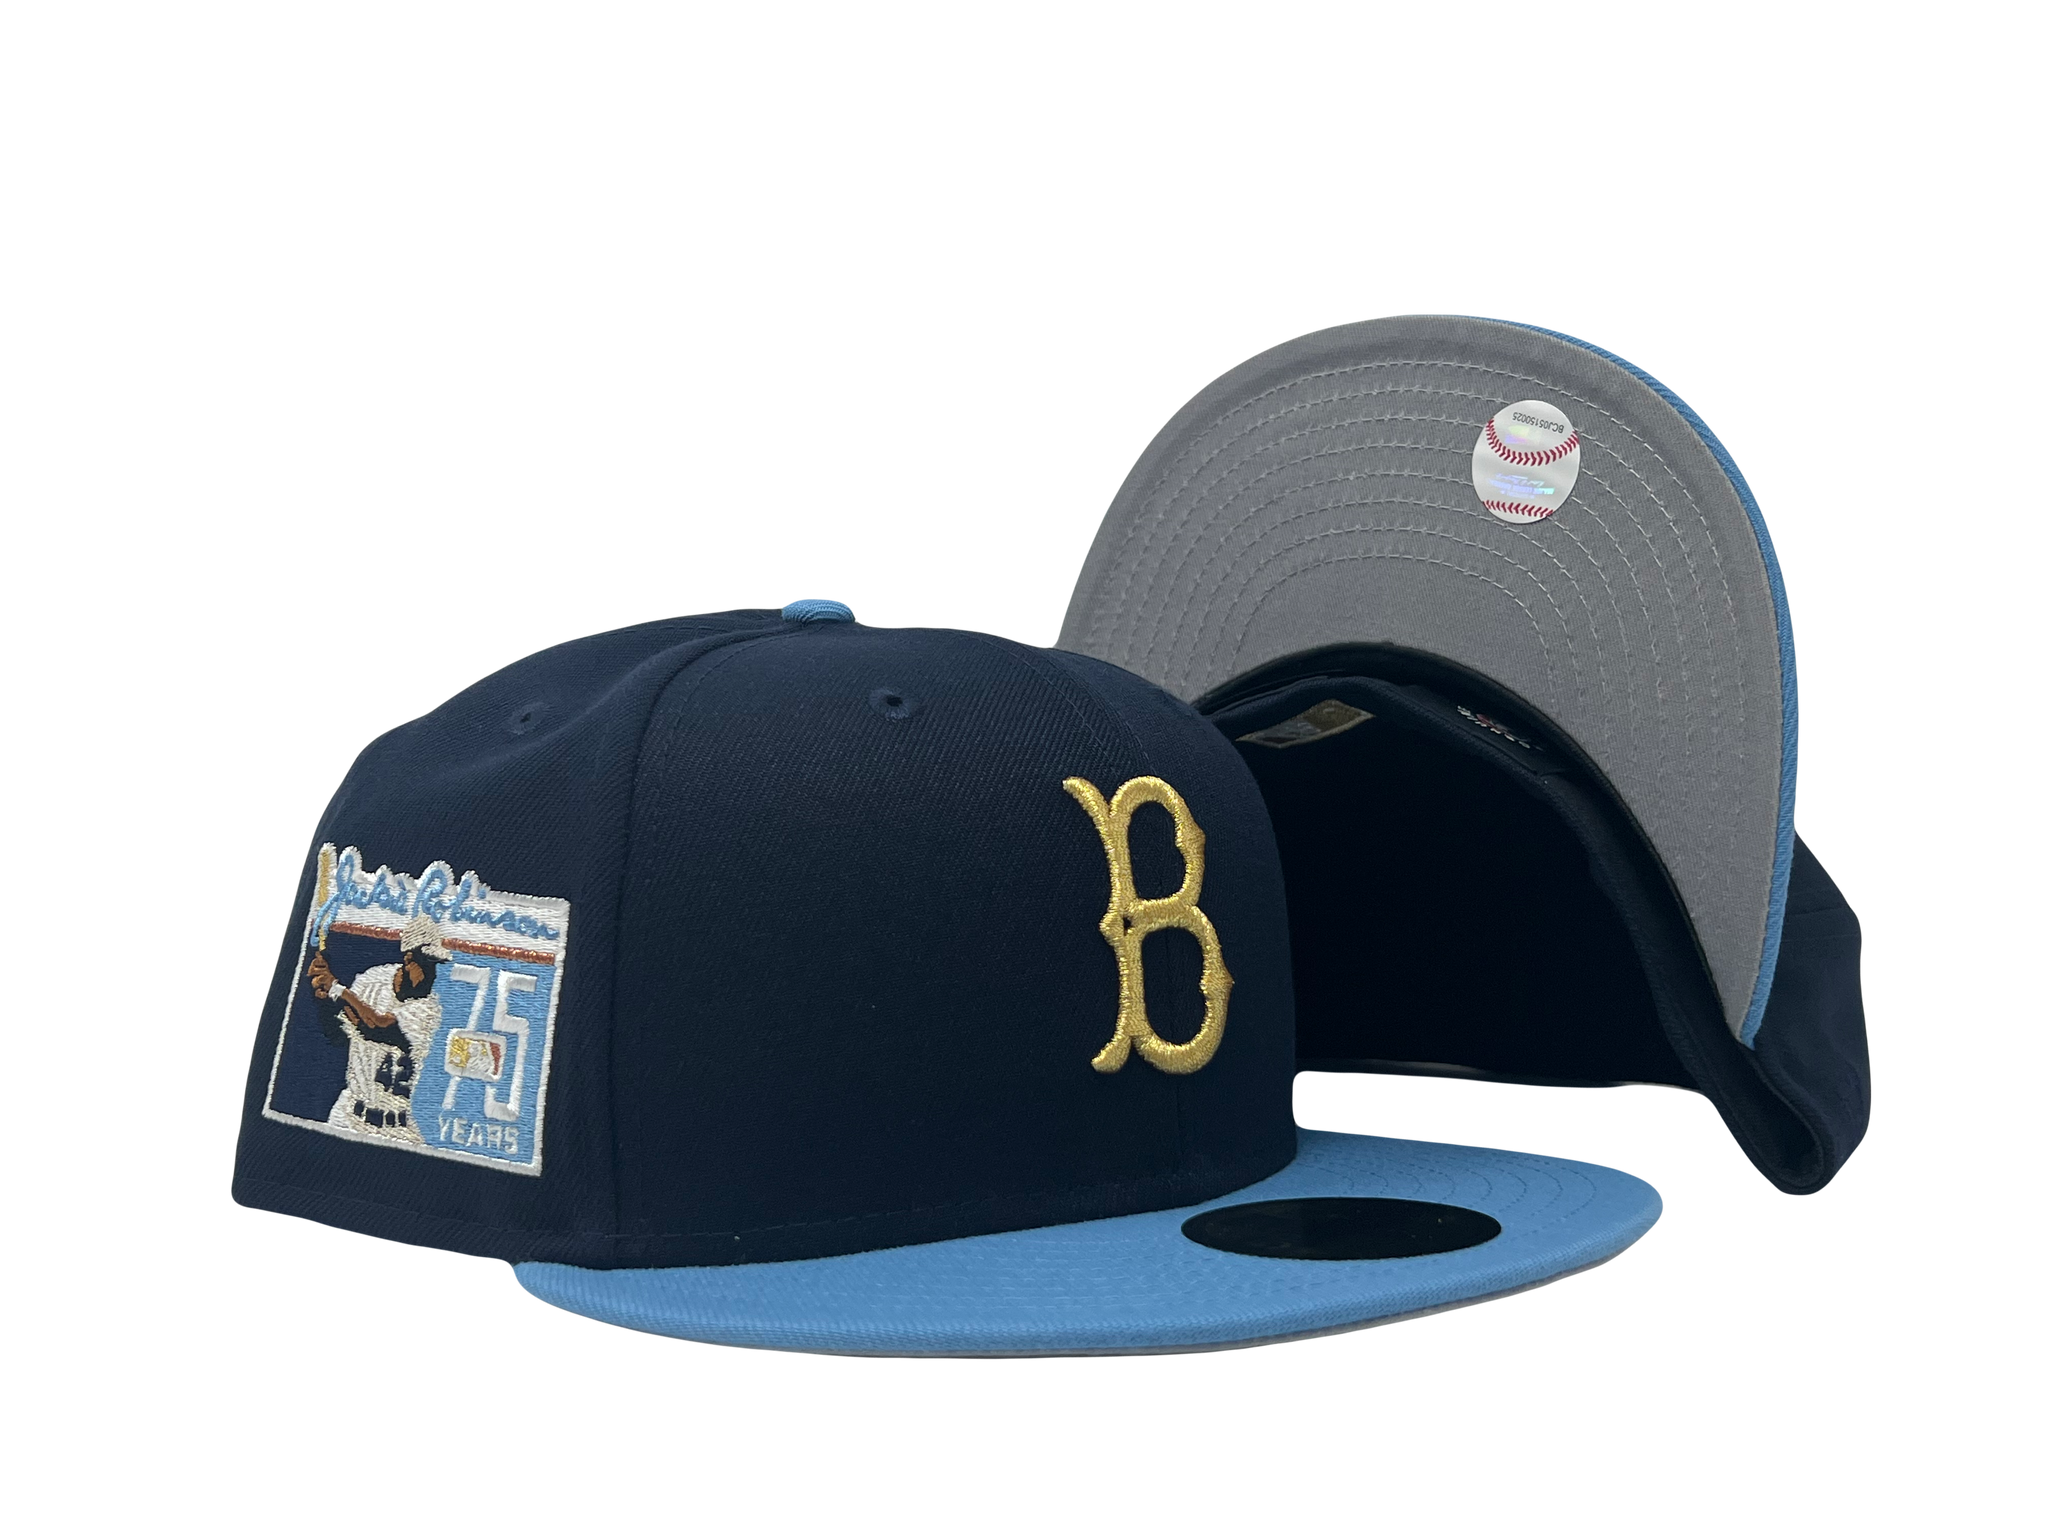 New Era Brooklyn Dodgers Jackie Robinson 75 Years Gold Throwback Edition  59Fifty Fitted Hat, EXCLUSIVE HATS, CAPS